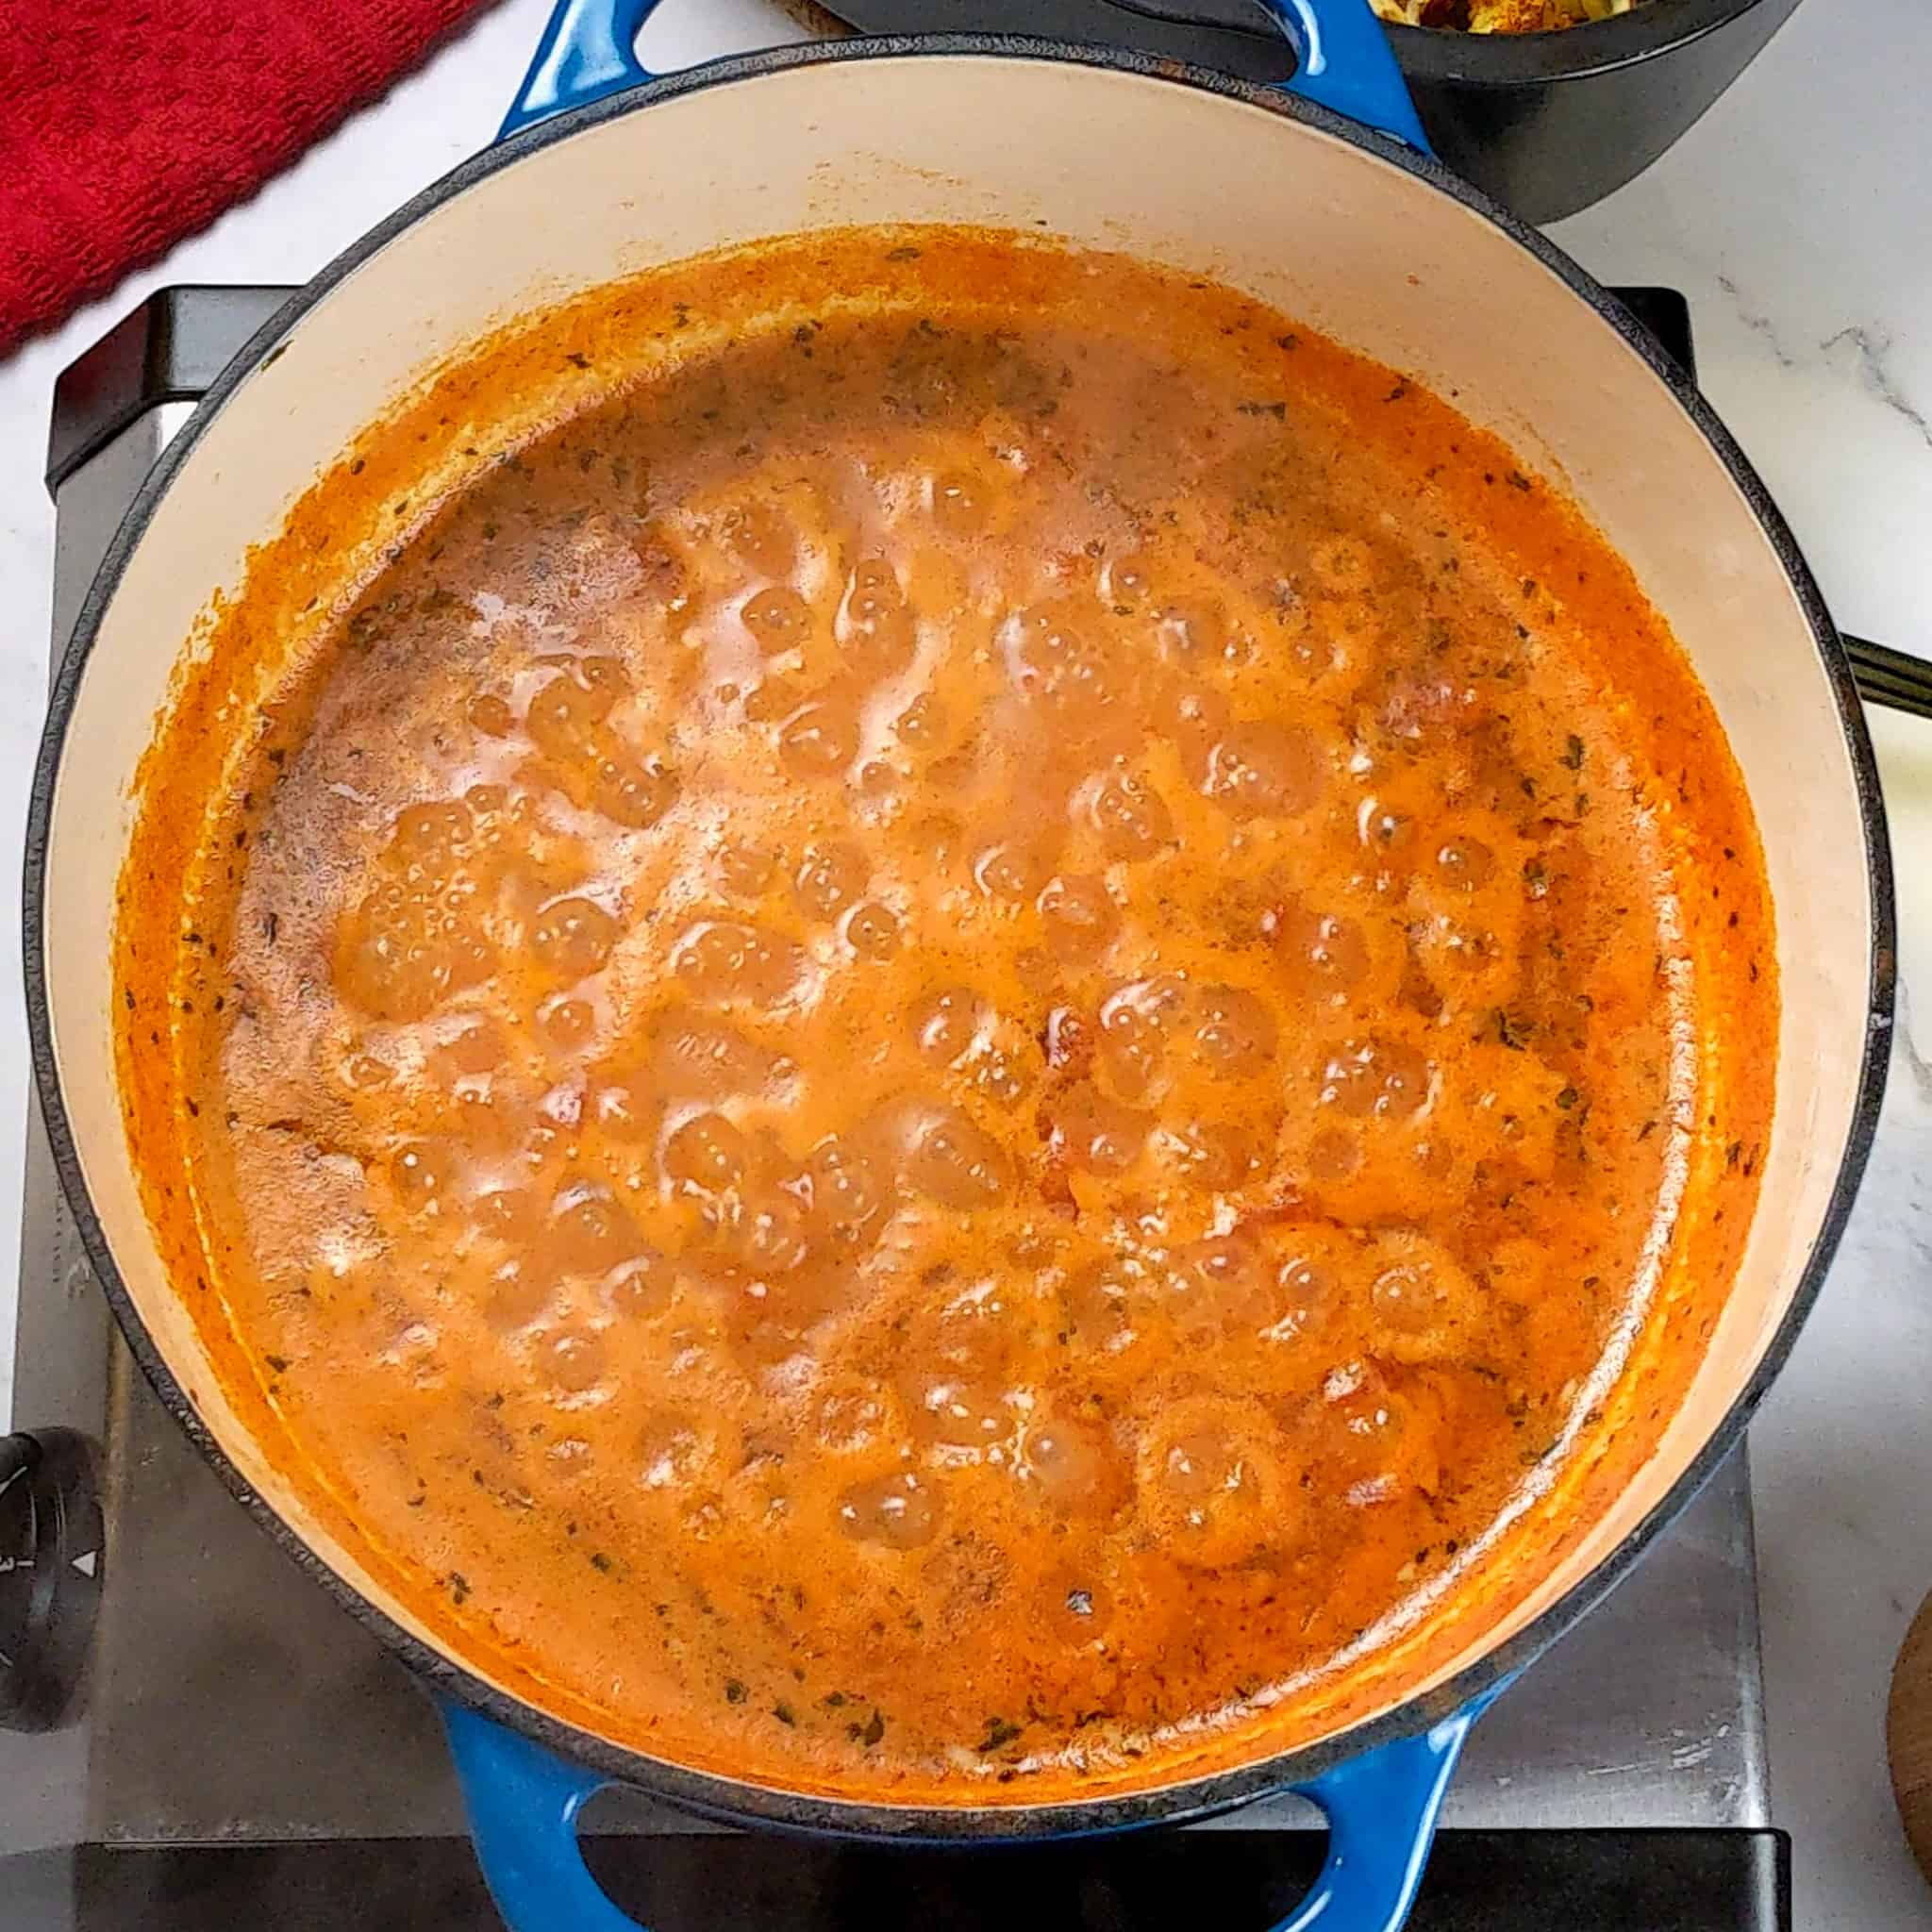 Bubbling and simmering curry sauce for the Air Fryer Roasted Chicken Chickpeas Vegetable Curry recipe.